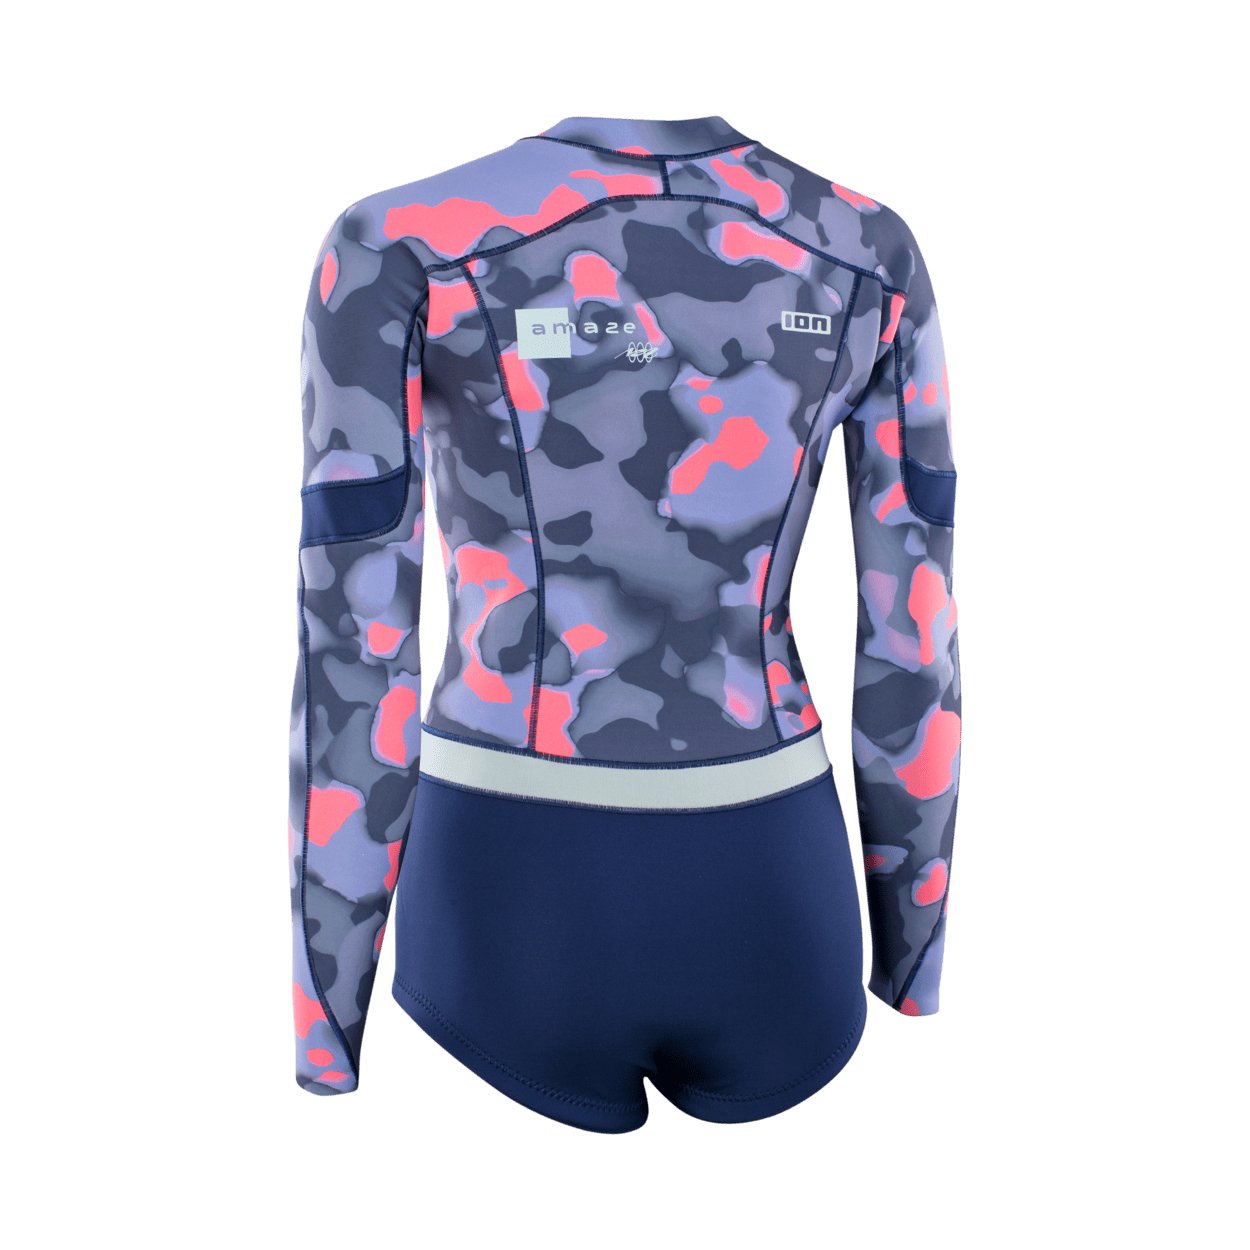 ION Women Wetsuit Amaze Hot Shorty 1.5 Longsleeve Front Zip 2023 - Worthing Watersports - 9010583058306 - Wetsuits - ION Water